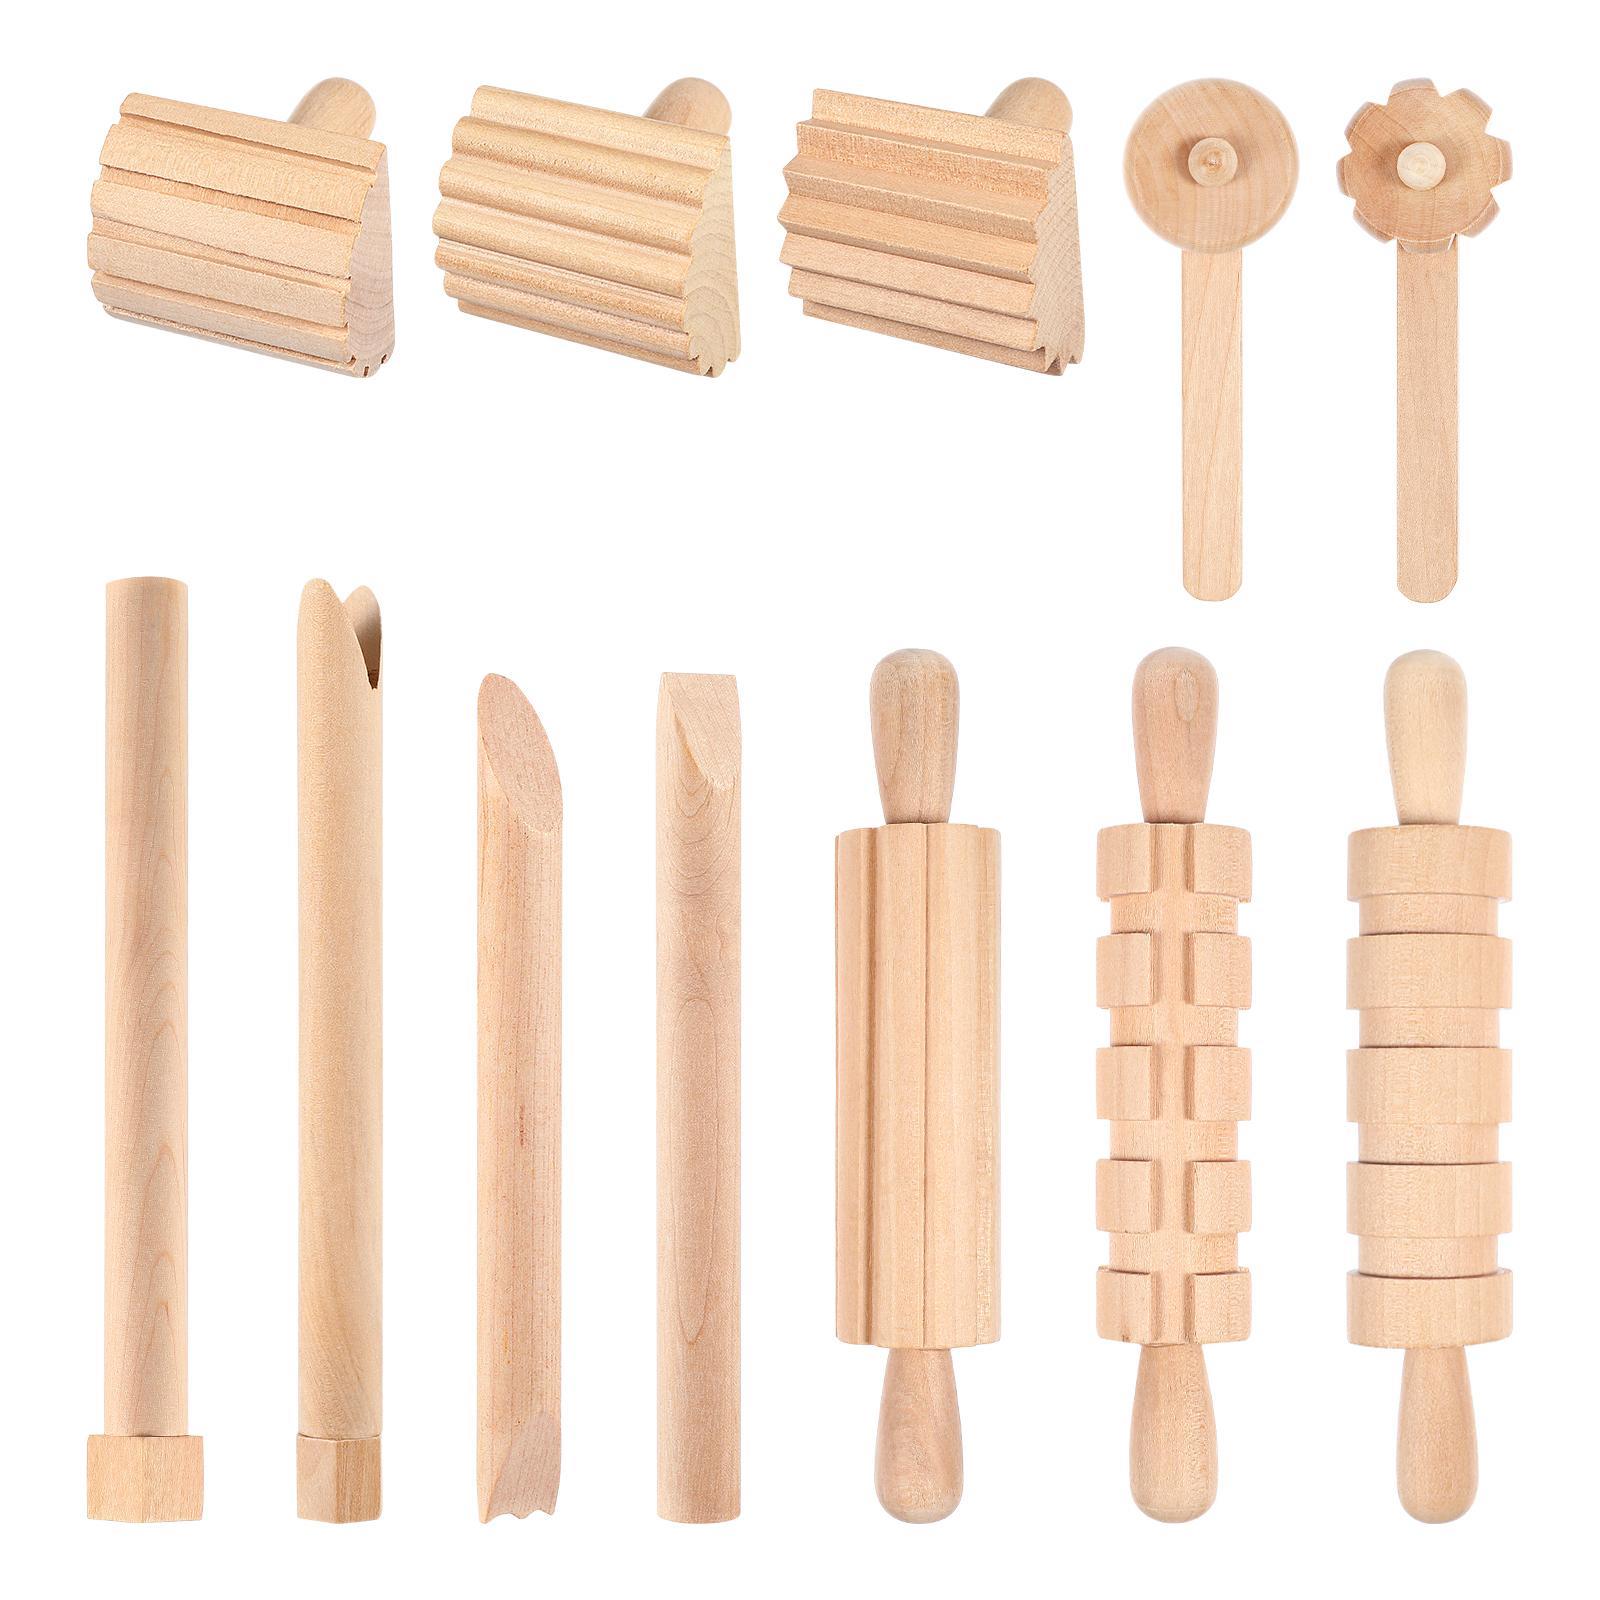 Pottery Clay Sculpting Tools Plasticine Wooden Child